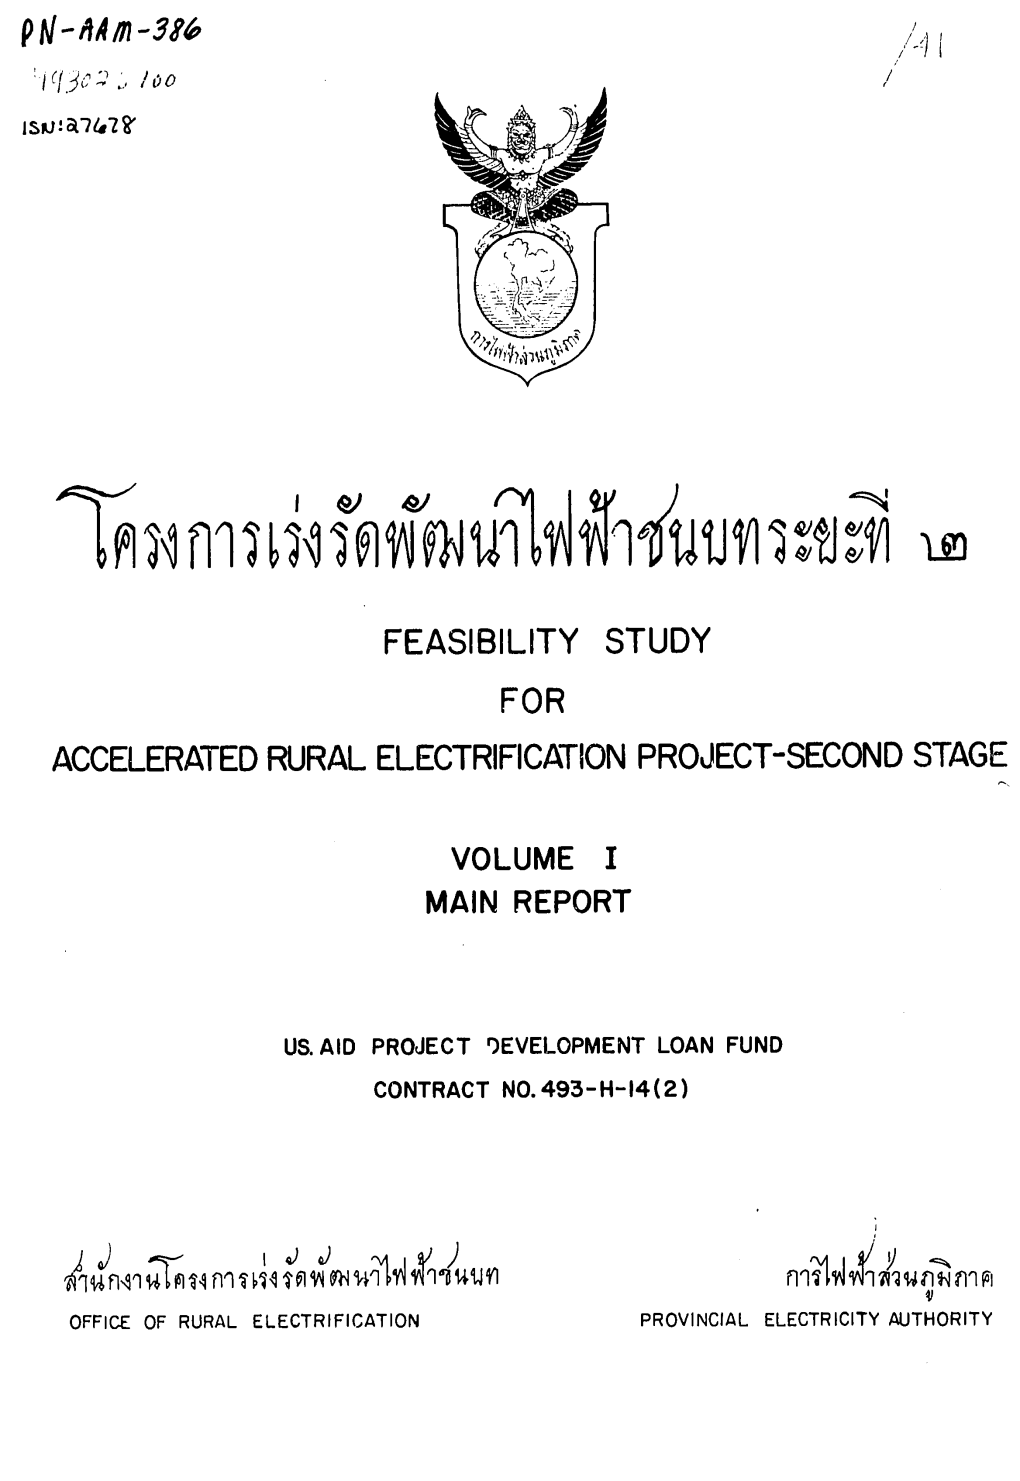 Feasibility Study for Accelerated Rural Electrification Project-Second Stage